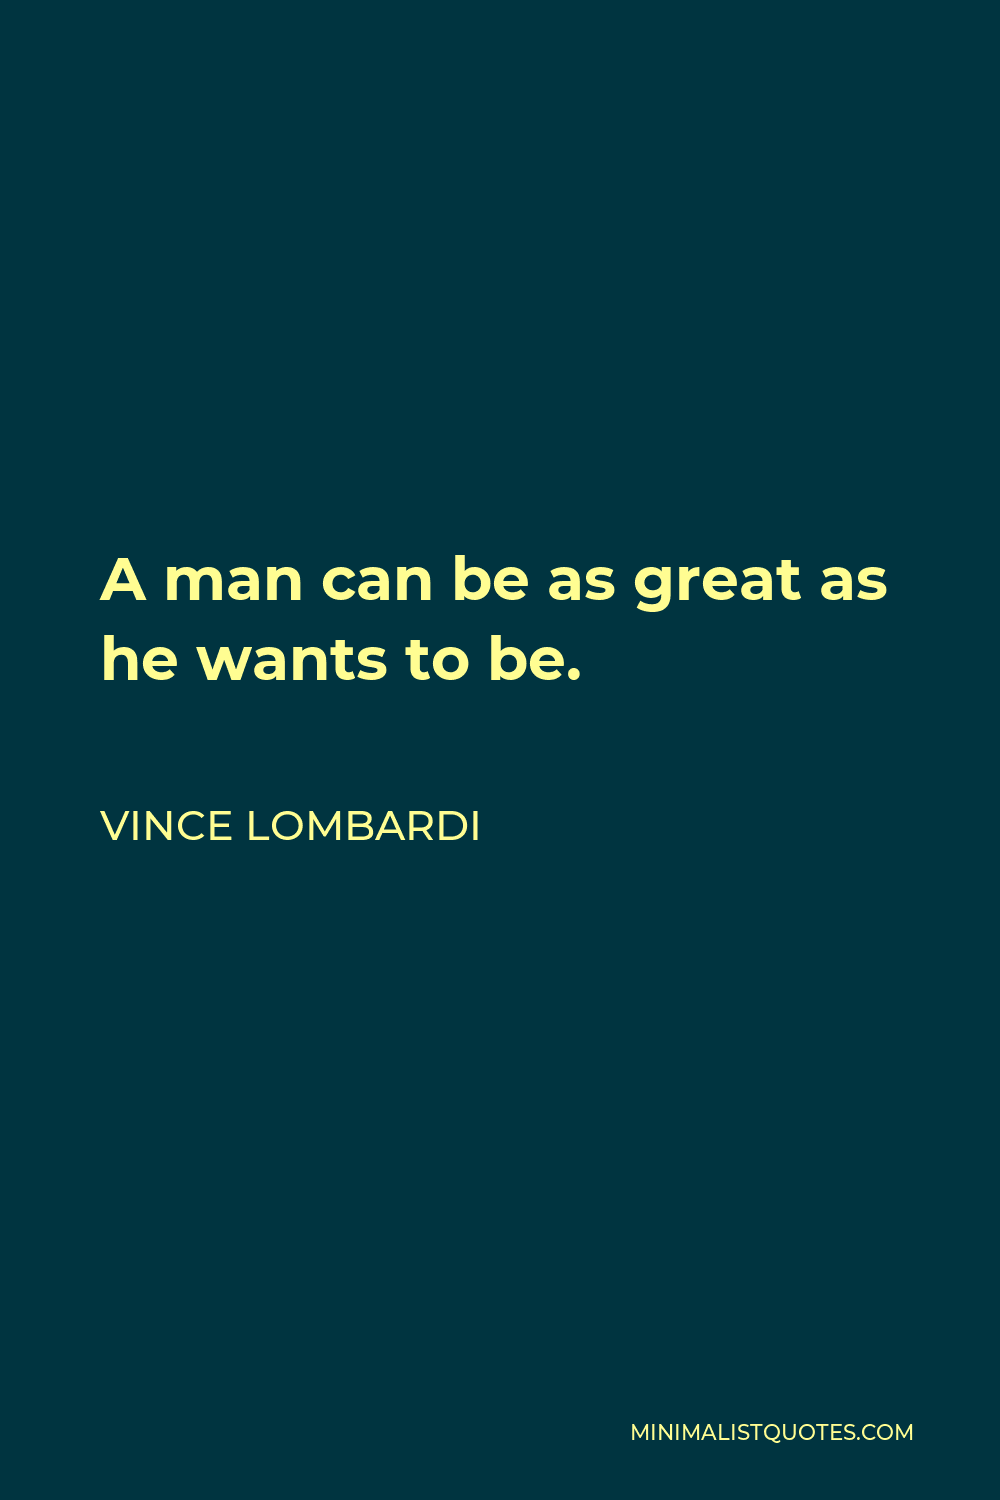 Vince Lombardi Quote - A man can be as great as he wants to be.